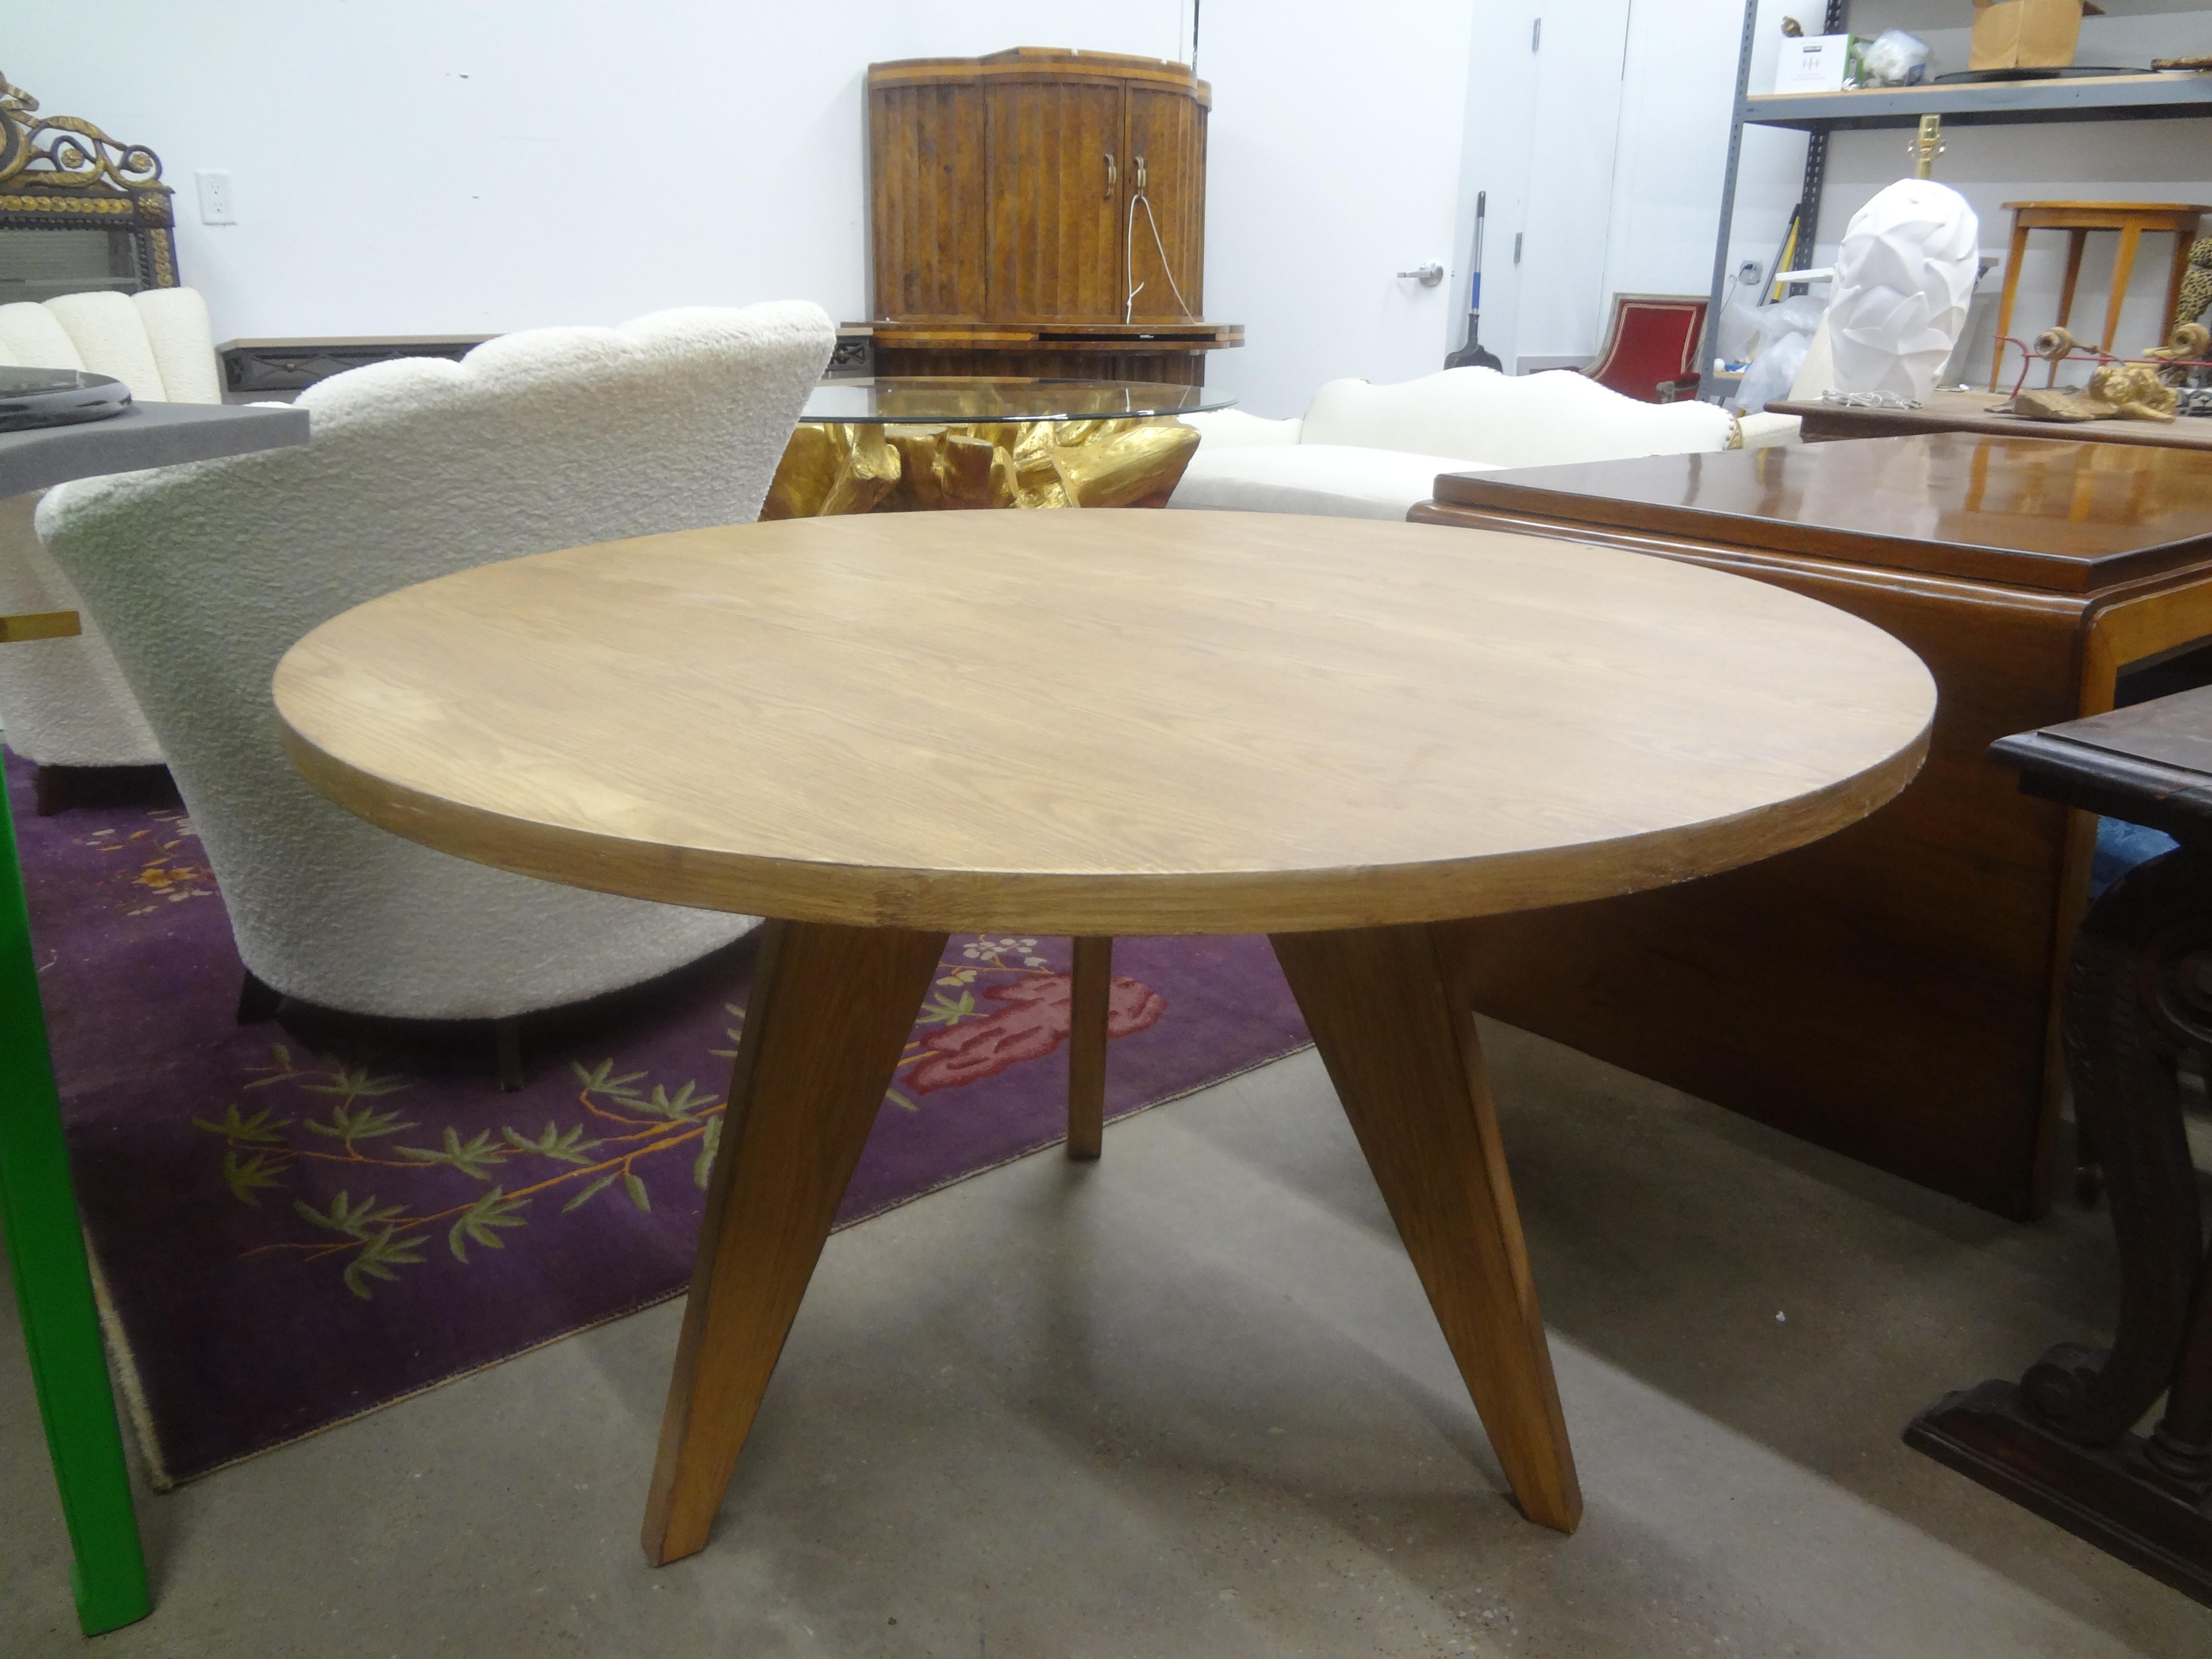 French Modern Pierre Chapo Inspired Center Table. This versatile French mid century elm and wrought iron center table or dining table with beautiful tripod legs will work well in a variety of interiors and design themes.